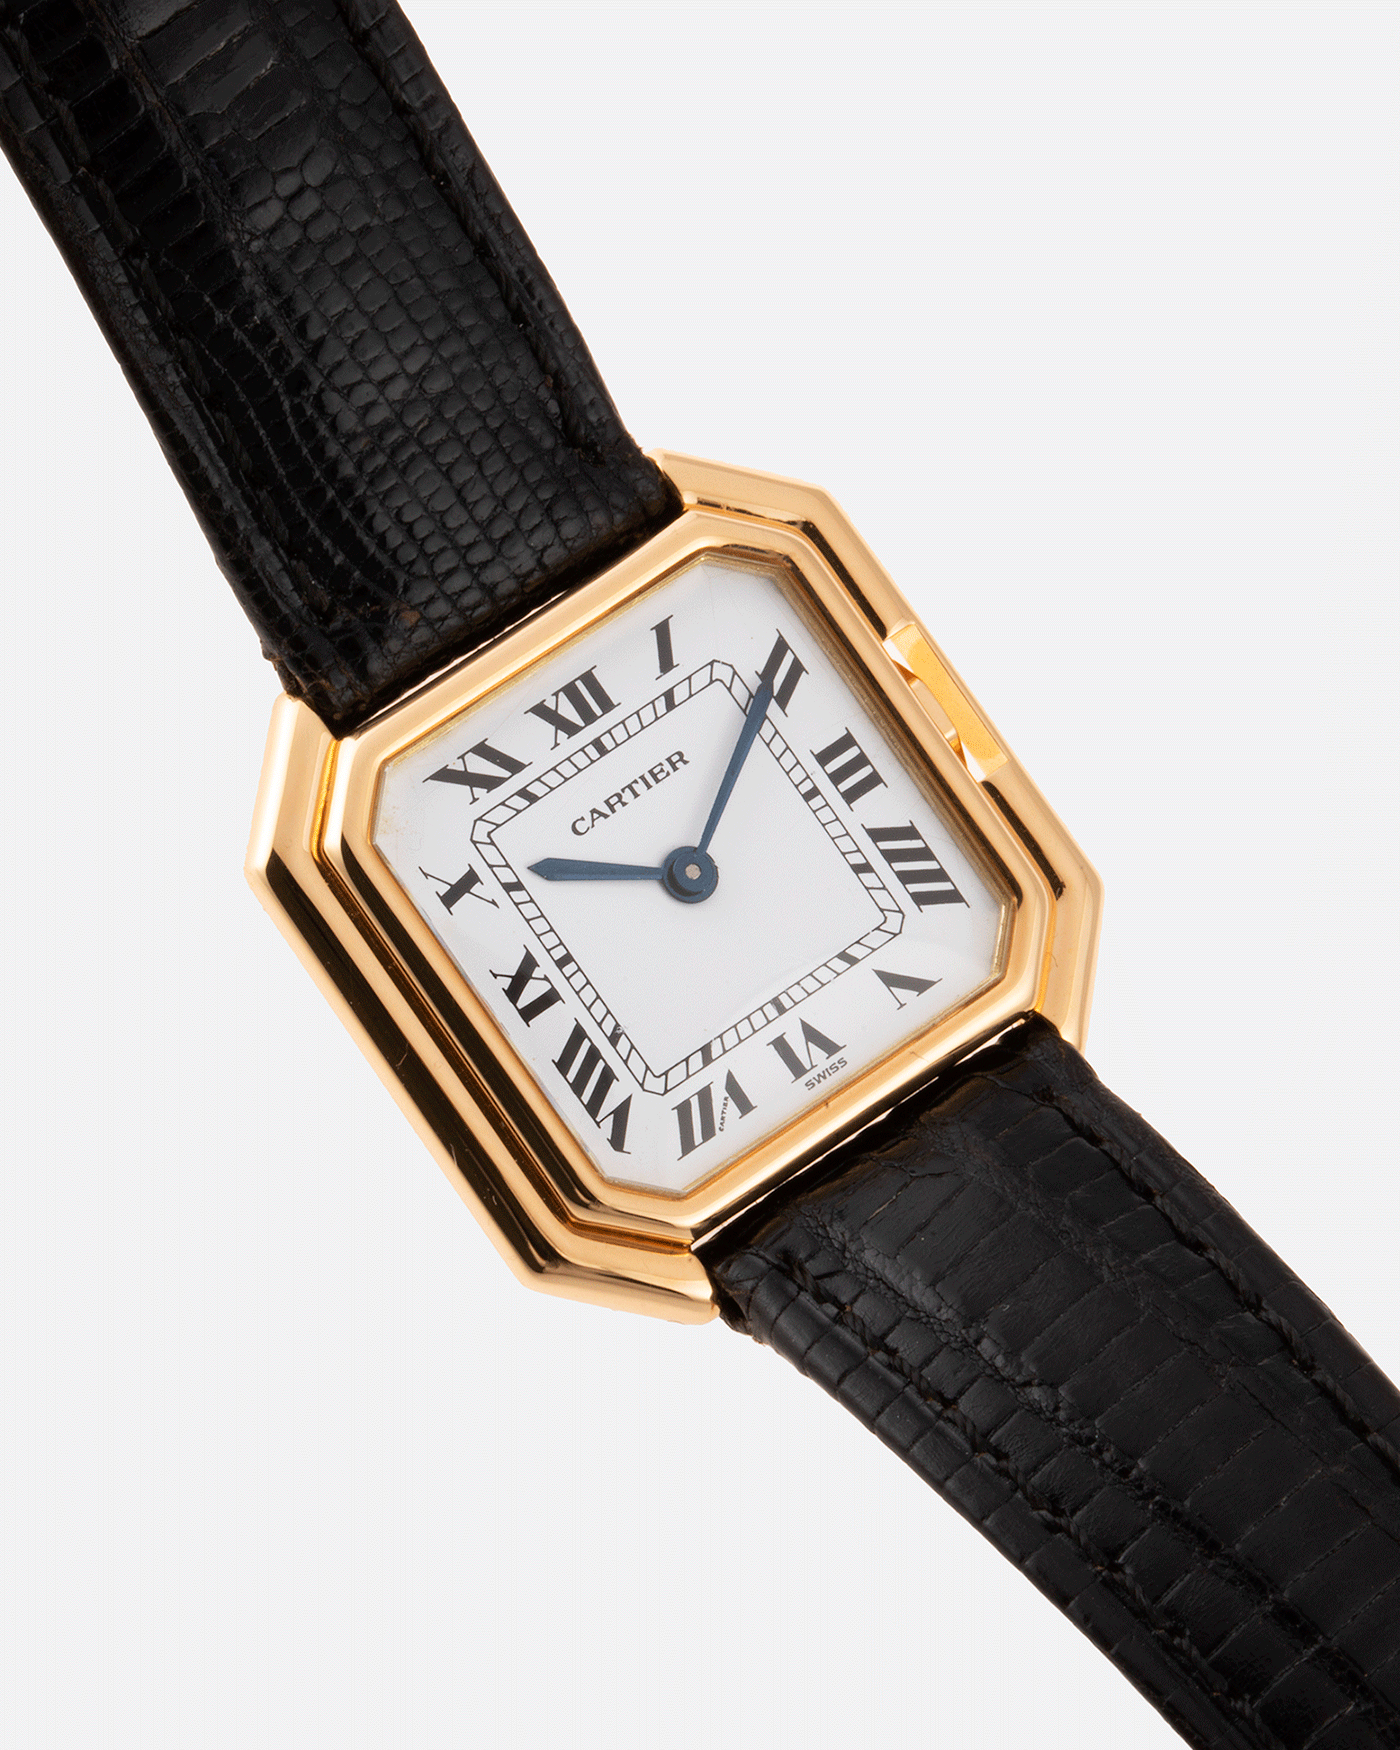 Brand: Cartier Year: 1970s Model: Ceinture Material: 18k Yellow Gold Movement: Manually Wound Cartier Cal. 78.1 Case Diameter: 25mm X 27mm Lug Width: 16mm Bracelet/Strap: Black Textured Leather Strap with Yellow Gold Cartier Buckle